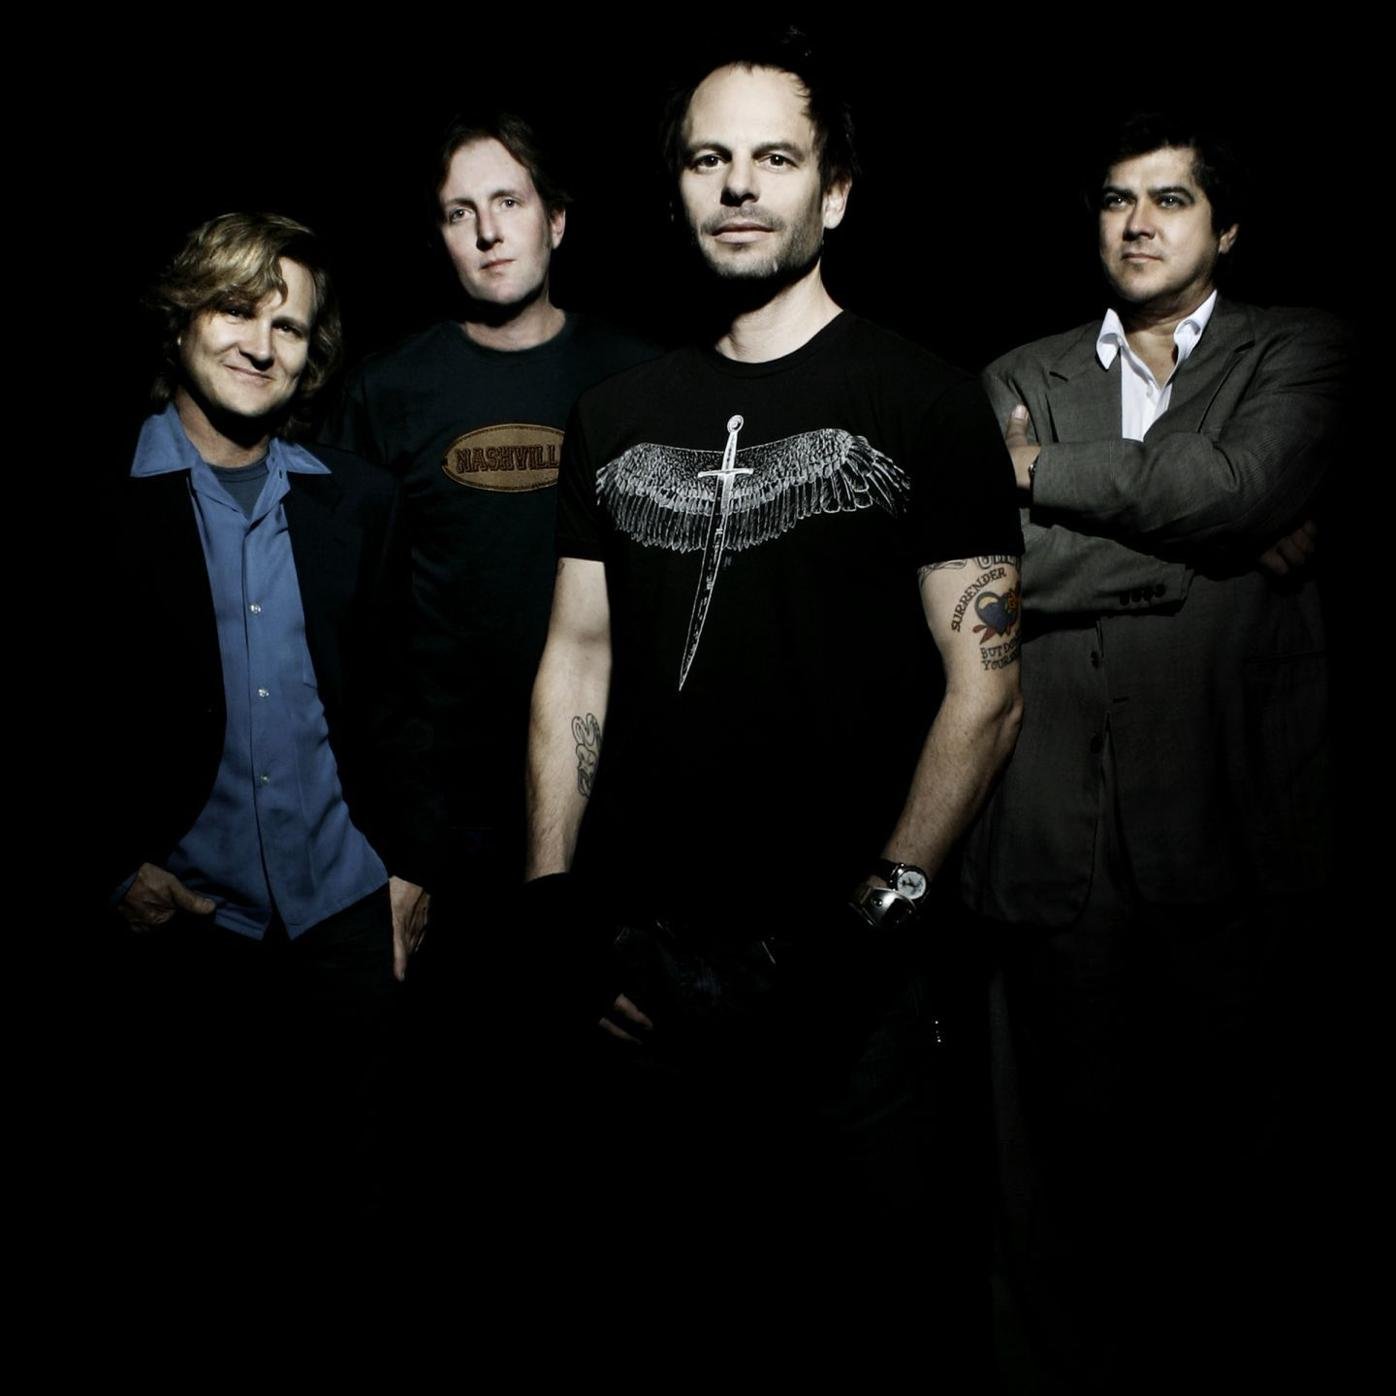 STILL 'MISERABLE' AFTER ALL THESE YEARS Gin Blossoms celebrate the